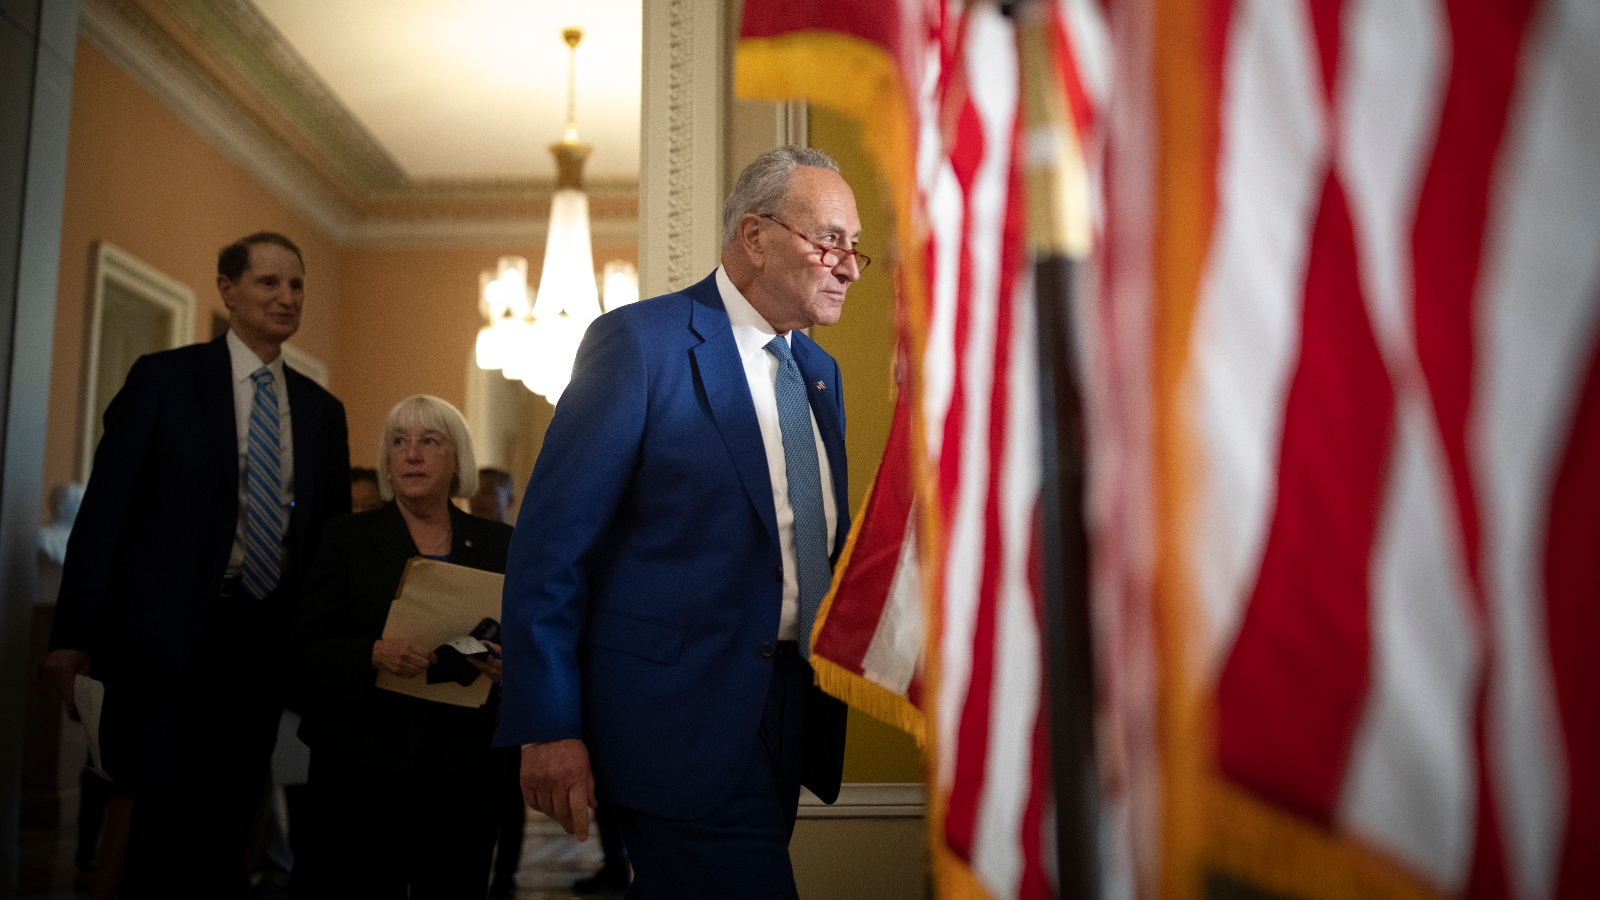 Senate Majority Leader Chuck Schumer (D-N.Y.) walks to the podium during a weekly Senate Policy Luncheon press conference on Capitol Hill in Washington, on Tuesday, September 13, 2022.